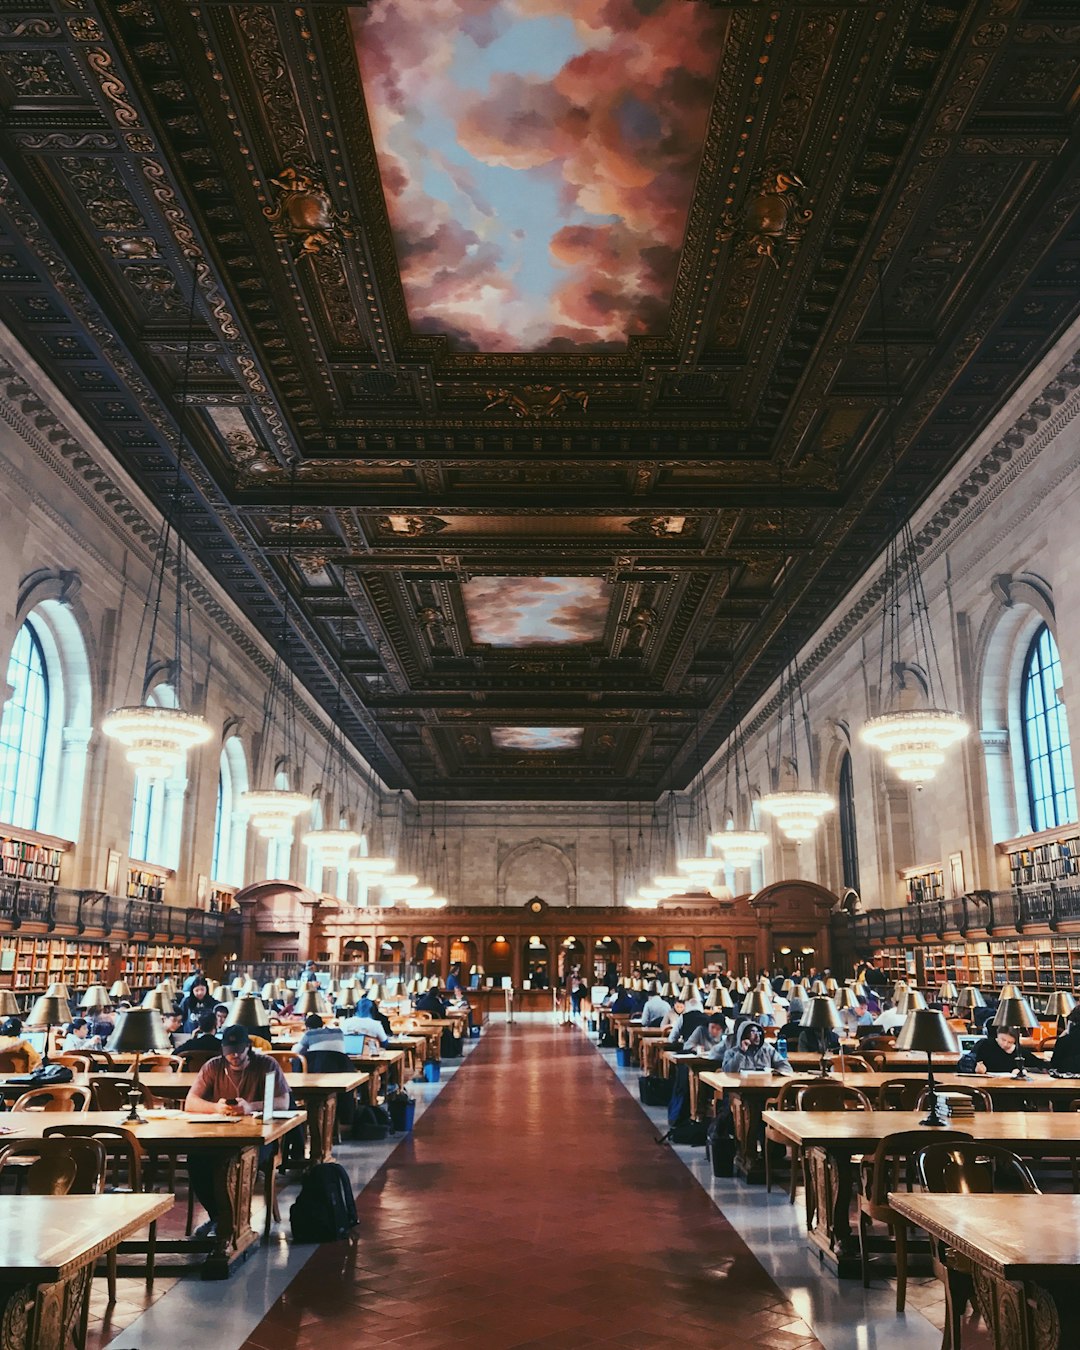 Travel Tips and Stories of New York Public Library in United States